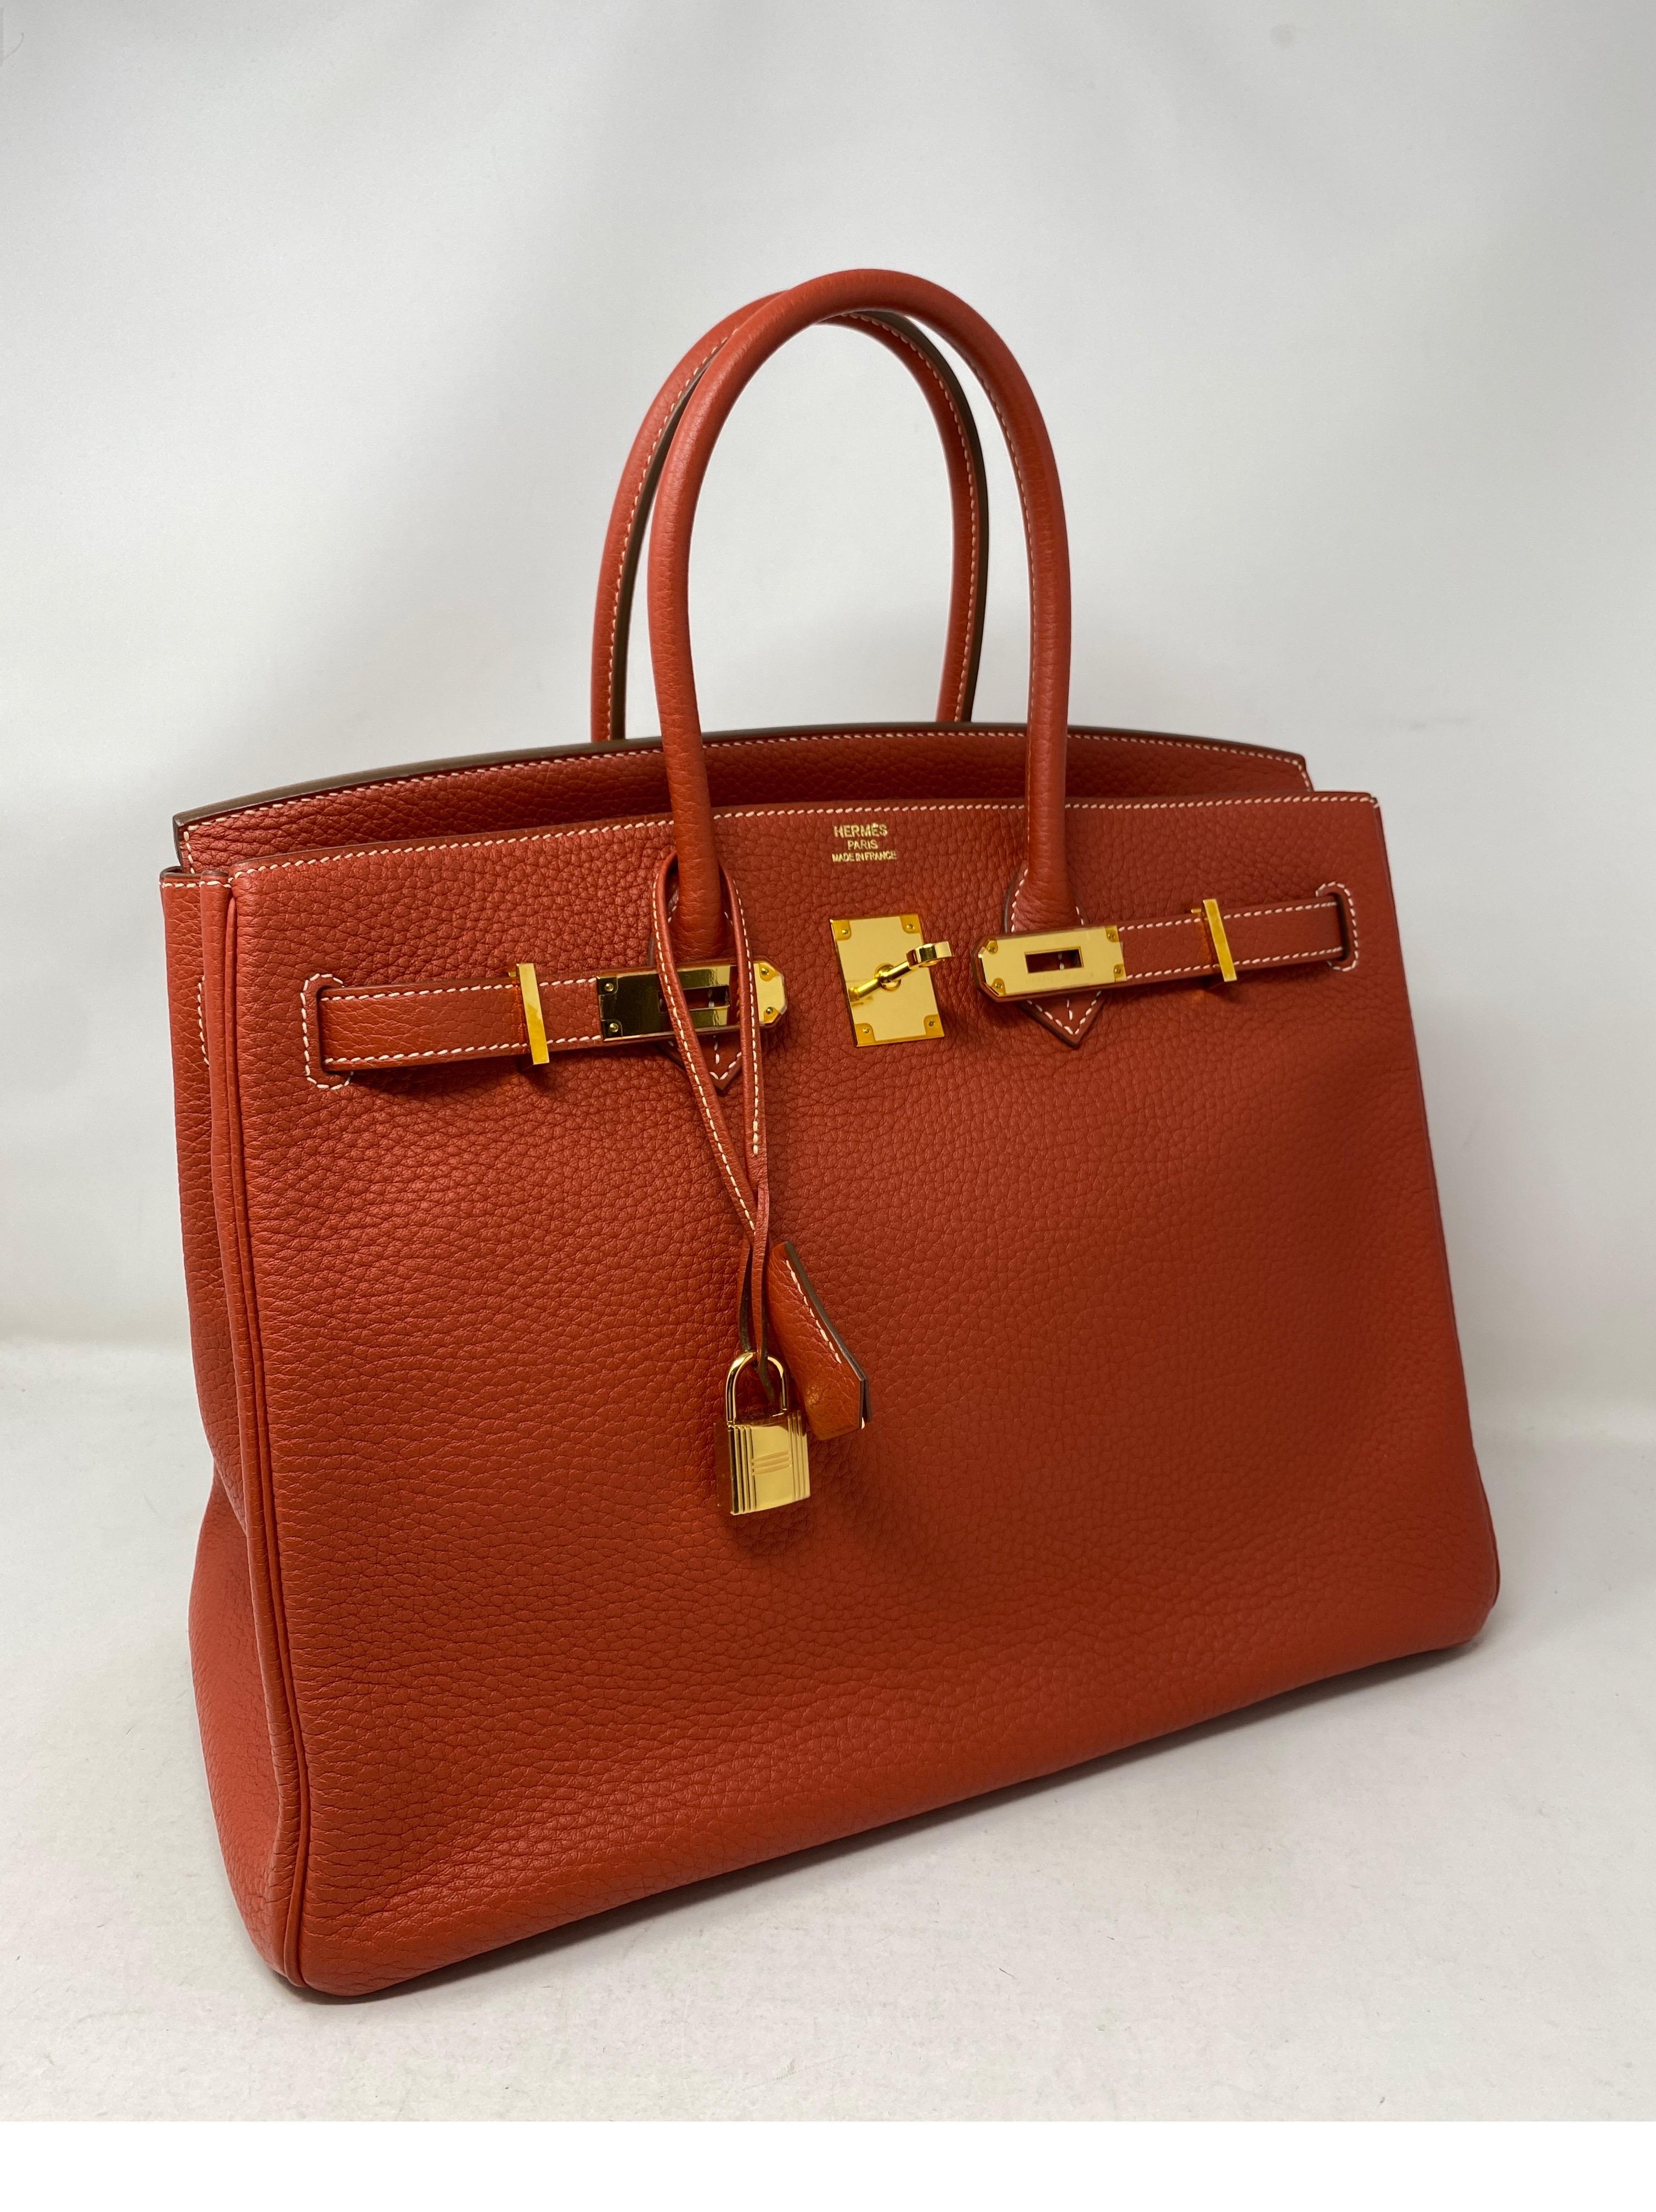 Hermes Birkin 35 Sanguine Bag. Gold hardware. Excellent condition. Plastic is still on hardware. Vintage but looks like it was never carried. Beautiful neutral color. Sanguine color is hard to find. Includes clochette, lock, keys, and dust cover.